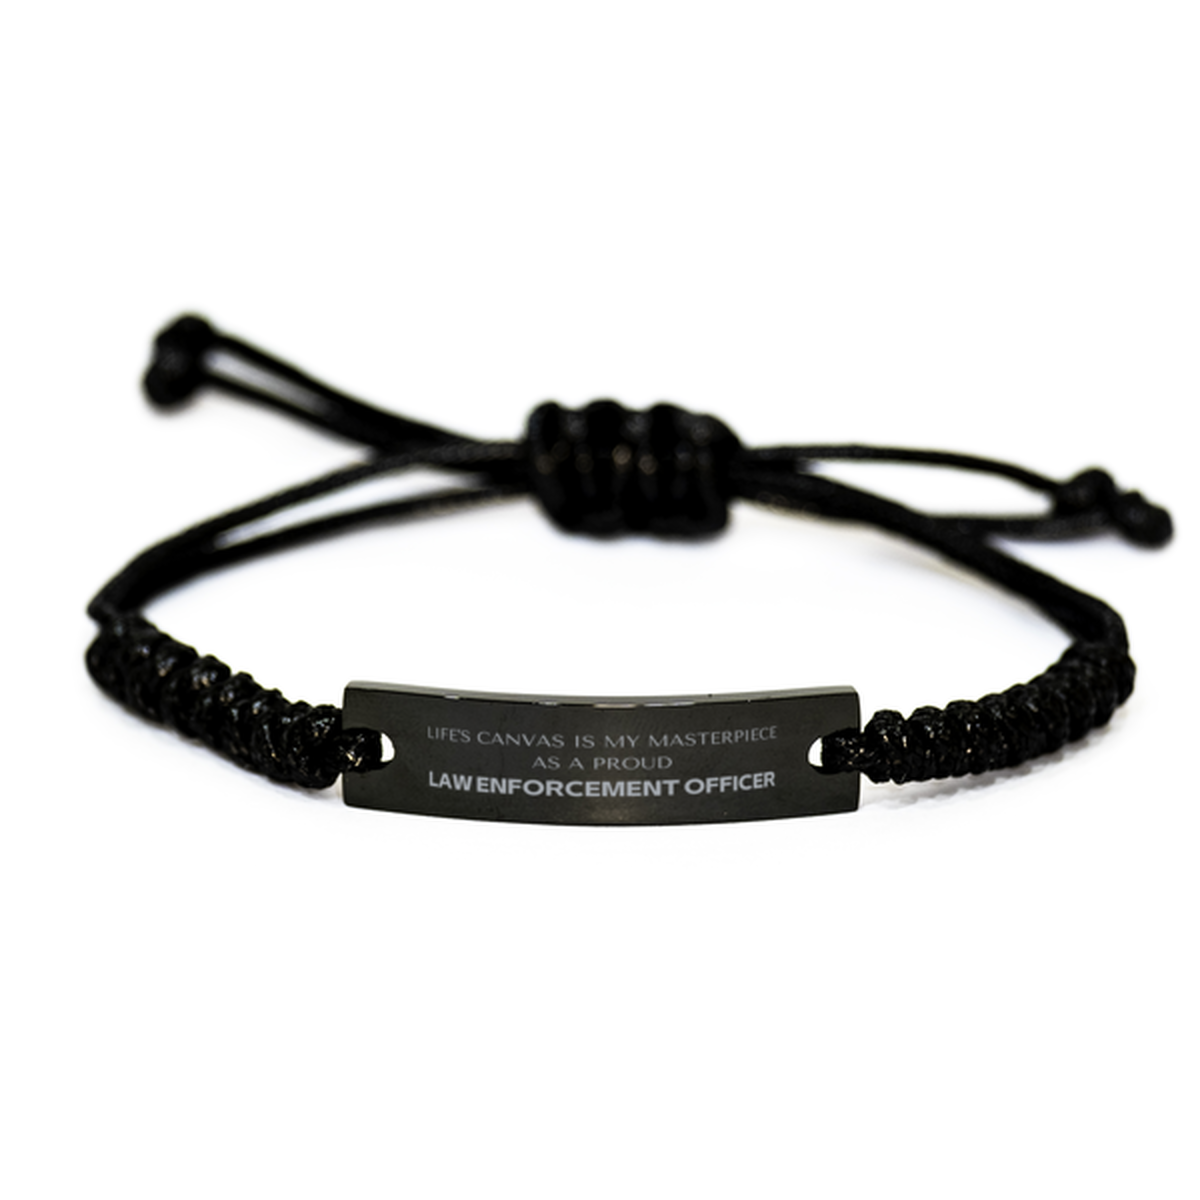 Proud Law Enforcement Officer Gifts, Life's canvas is my masterpiece, Epic Birthday Christmas Unique Black Rope Bracelet For Law Enforcement Officer, Coworkers, Men, Women, Friends